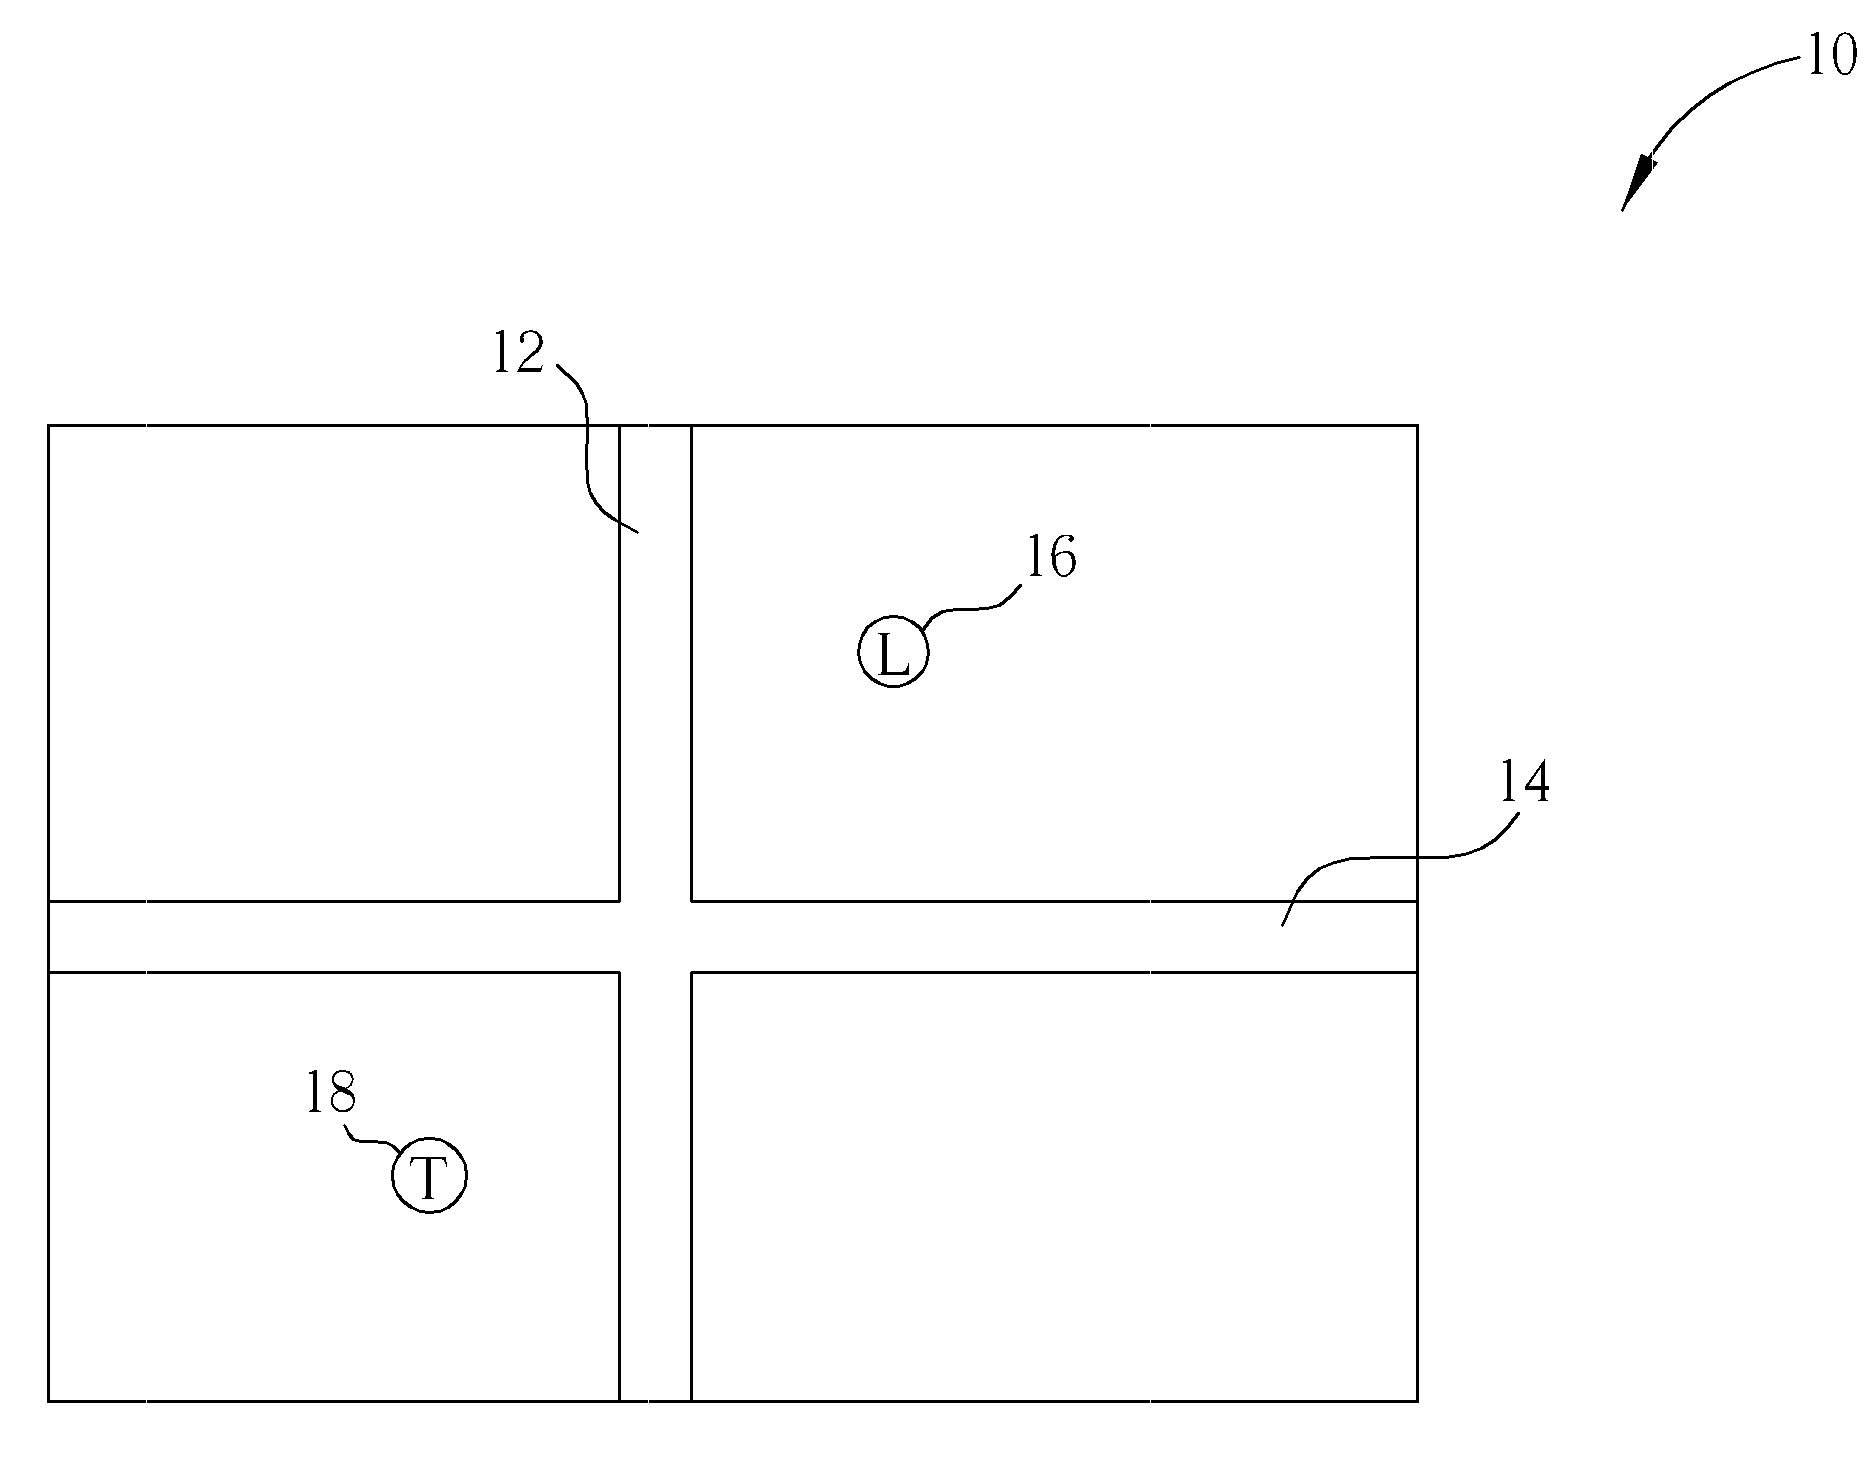 Method of spreading out and displaying closely located points of interest on a personal navigation device